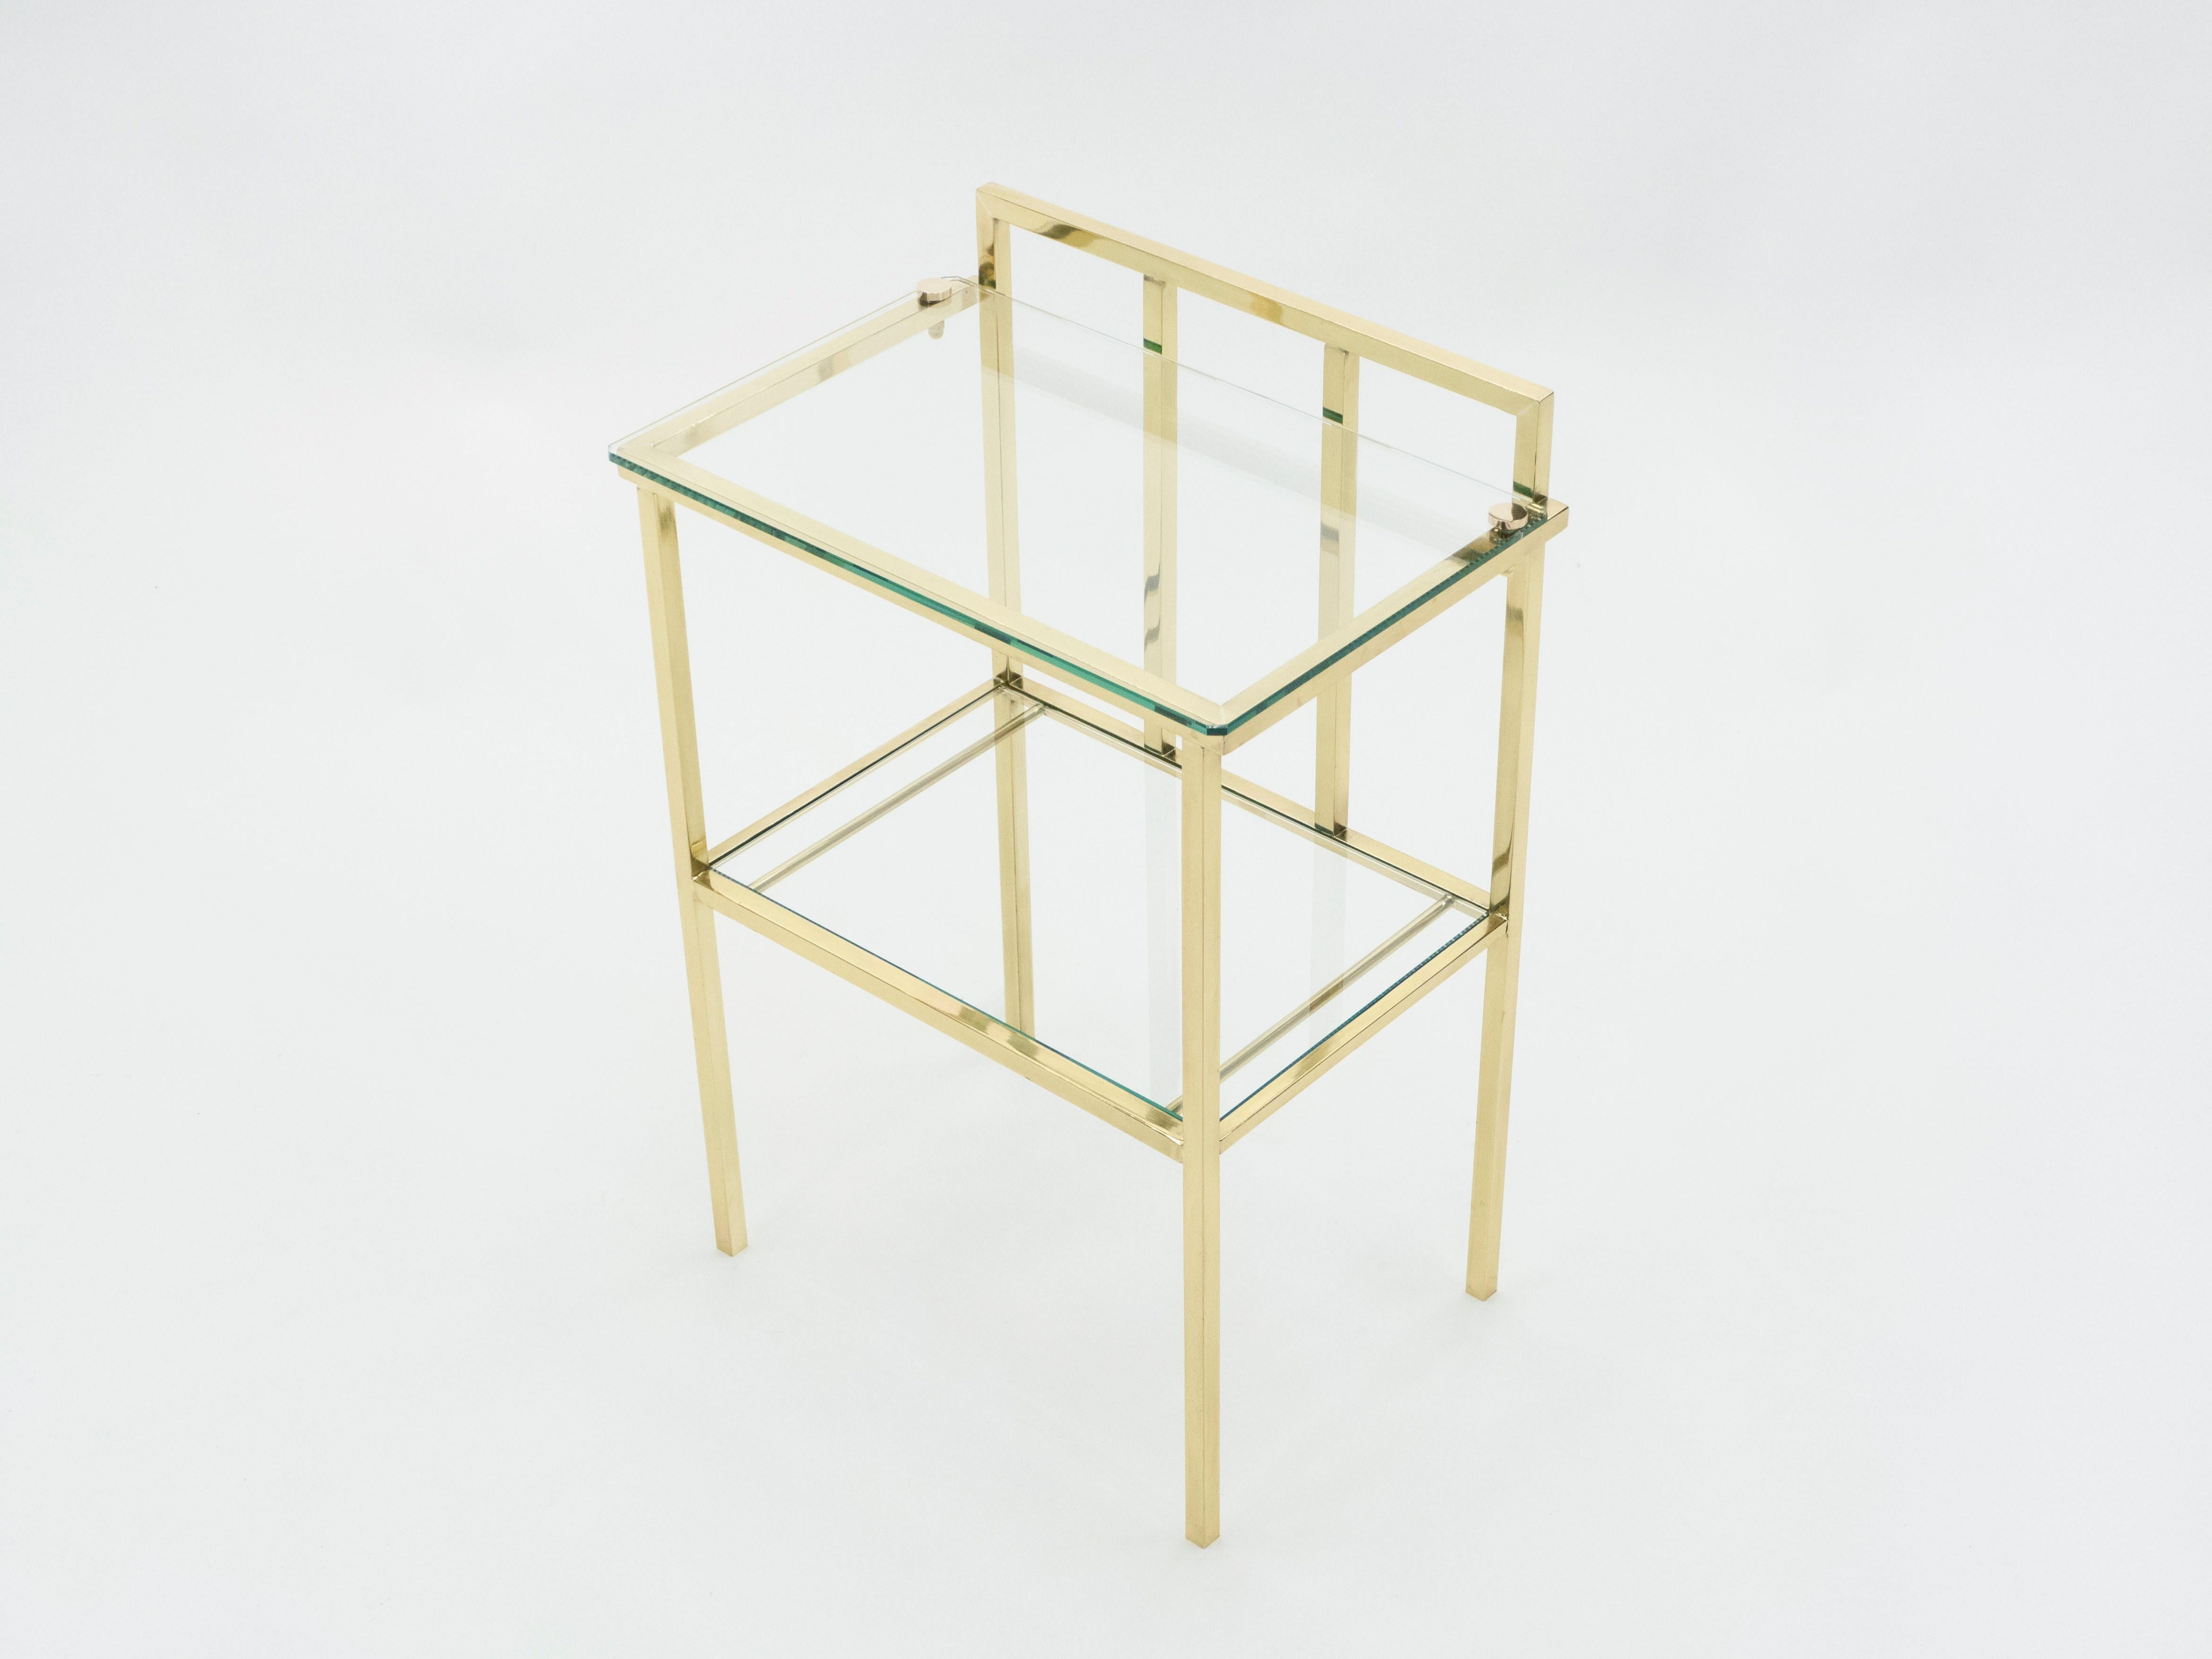 French Brass Two-Tier Glass End Tables Attributed to Marc du Plantier, 1960s For Sale 3